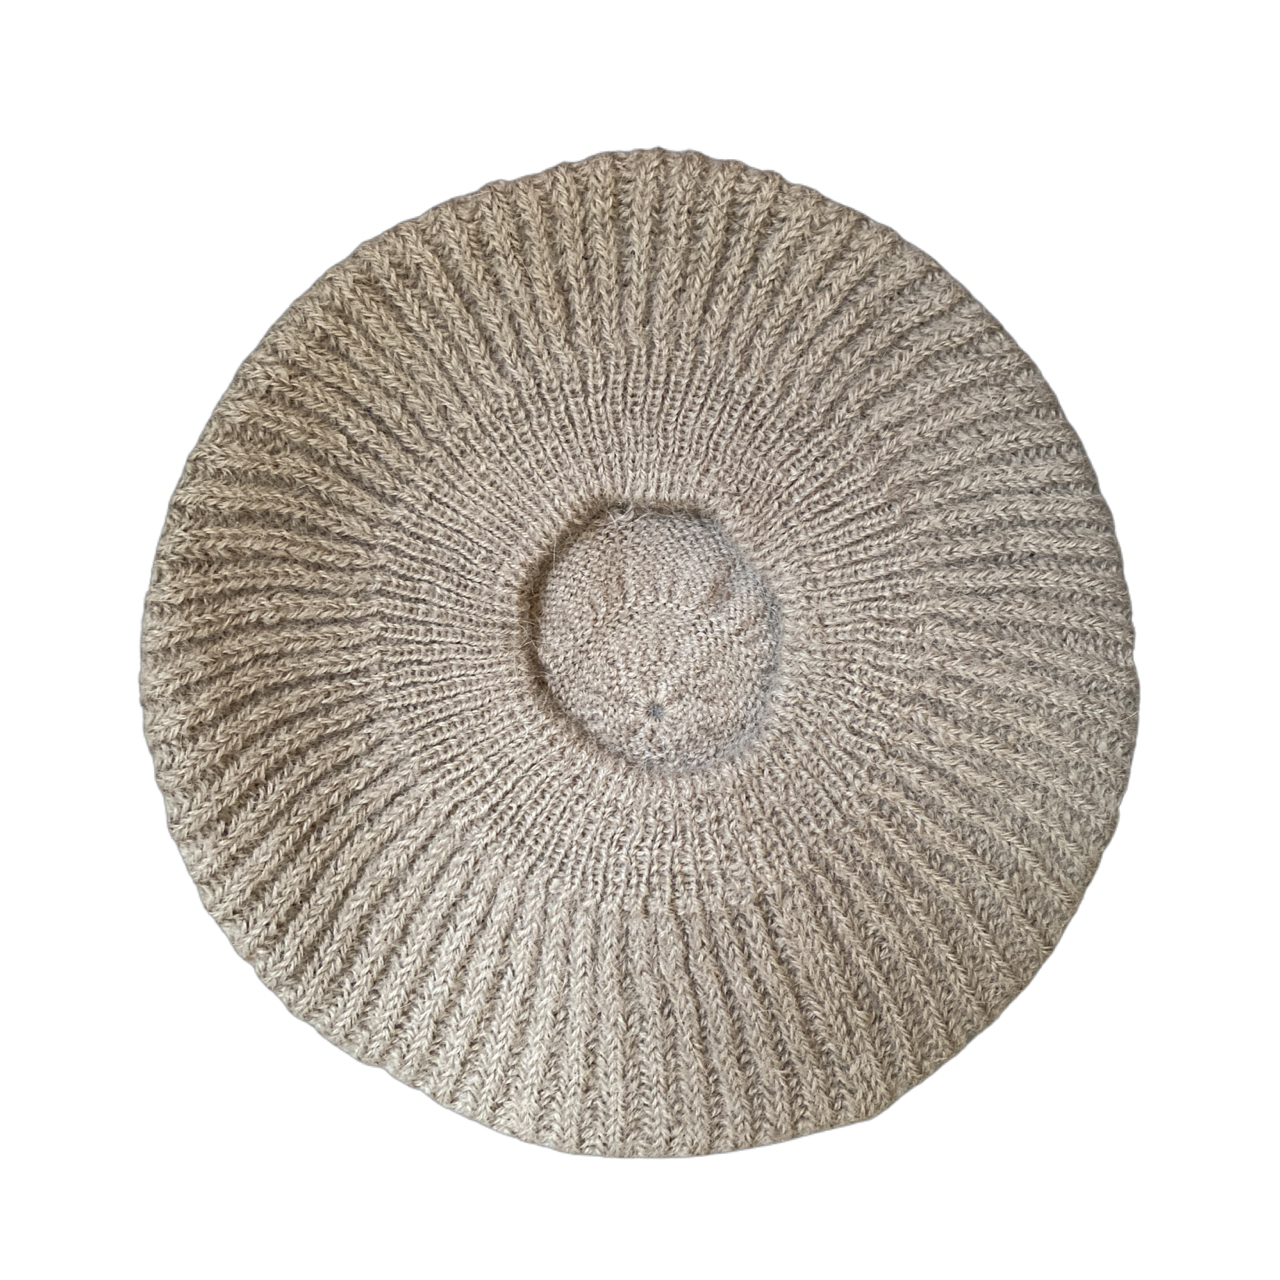 The Alpaca Wool Beret by 1 Life - Sand Color